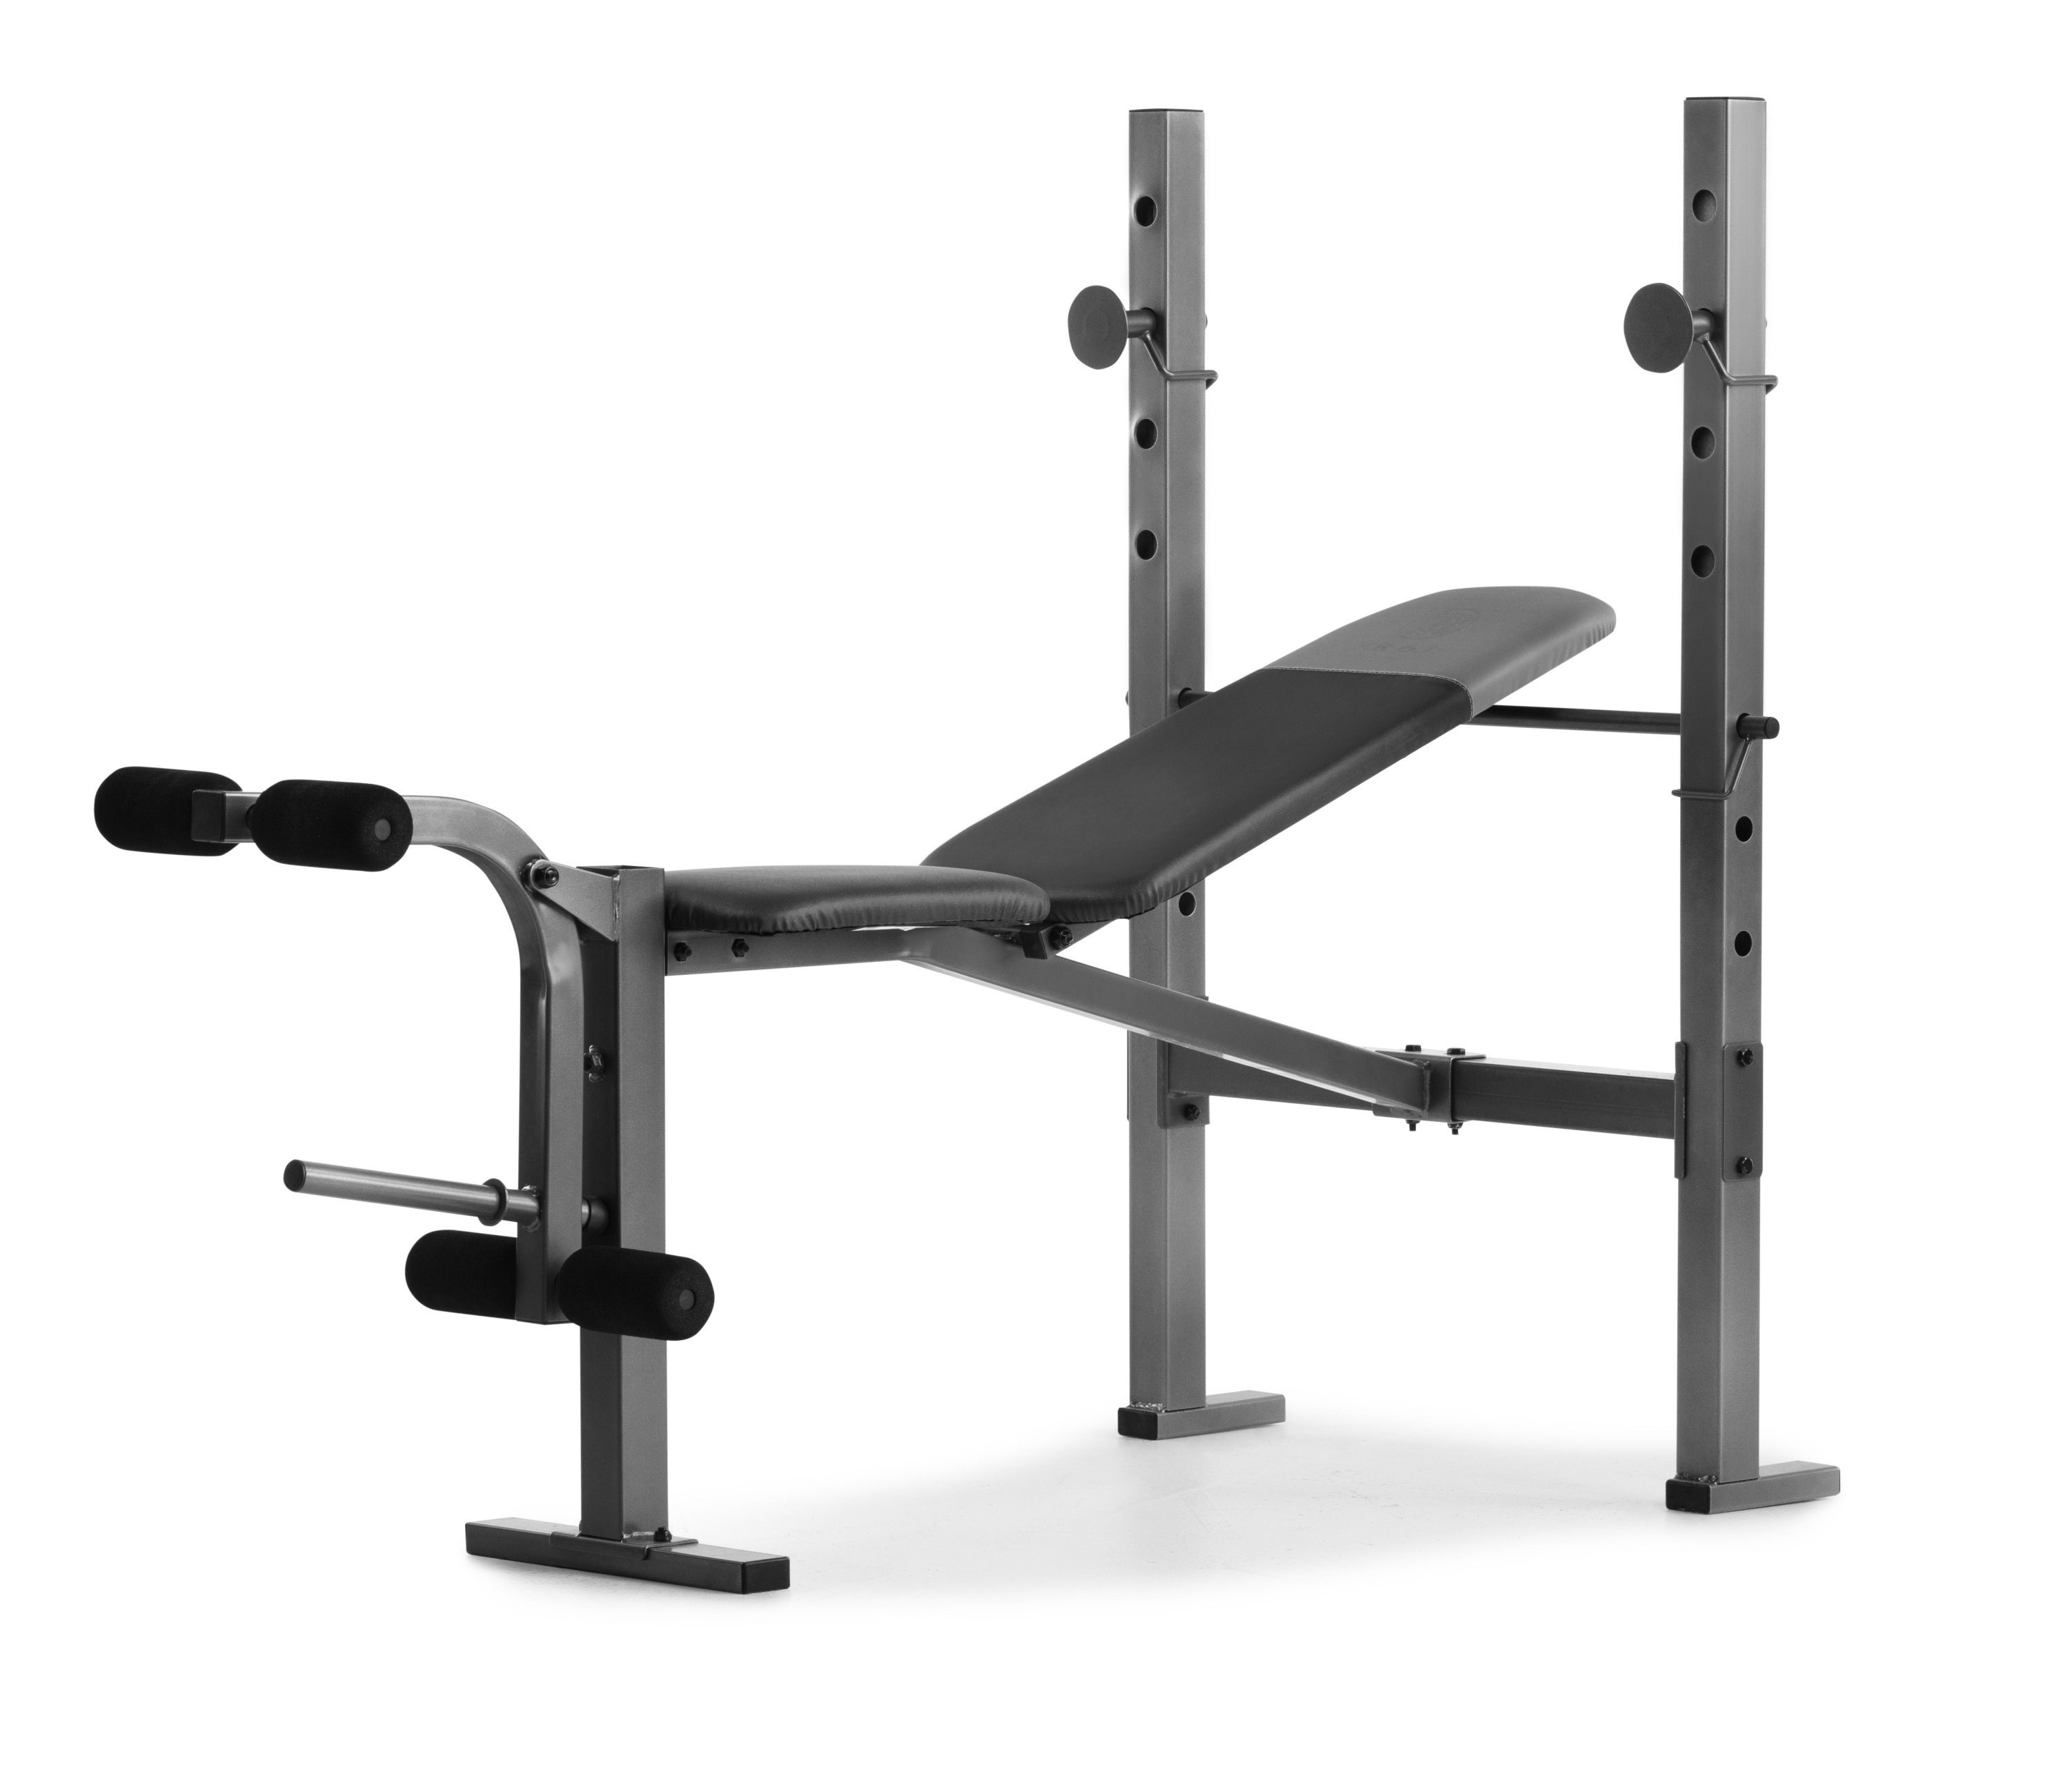 Weider XR 6.1 Adjustable Weight Bench with Leg Developer, 410 lb. Weight Limit - image 1 of 12